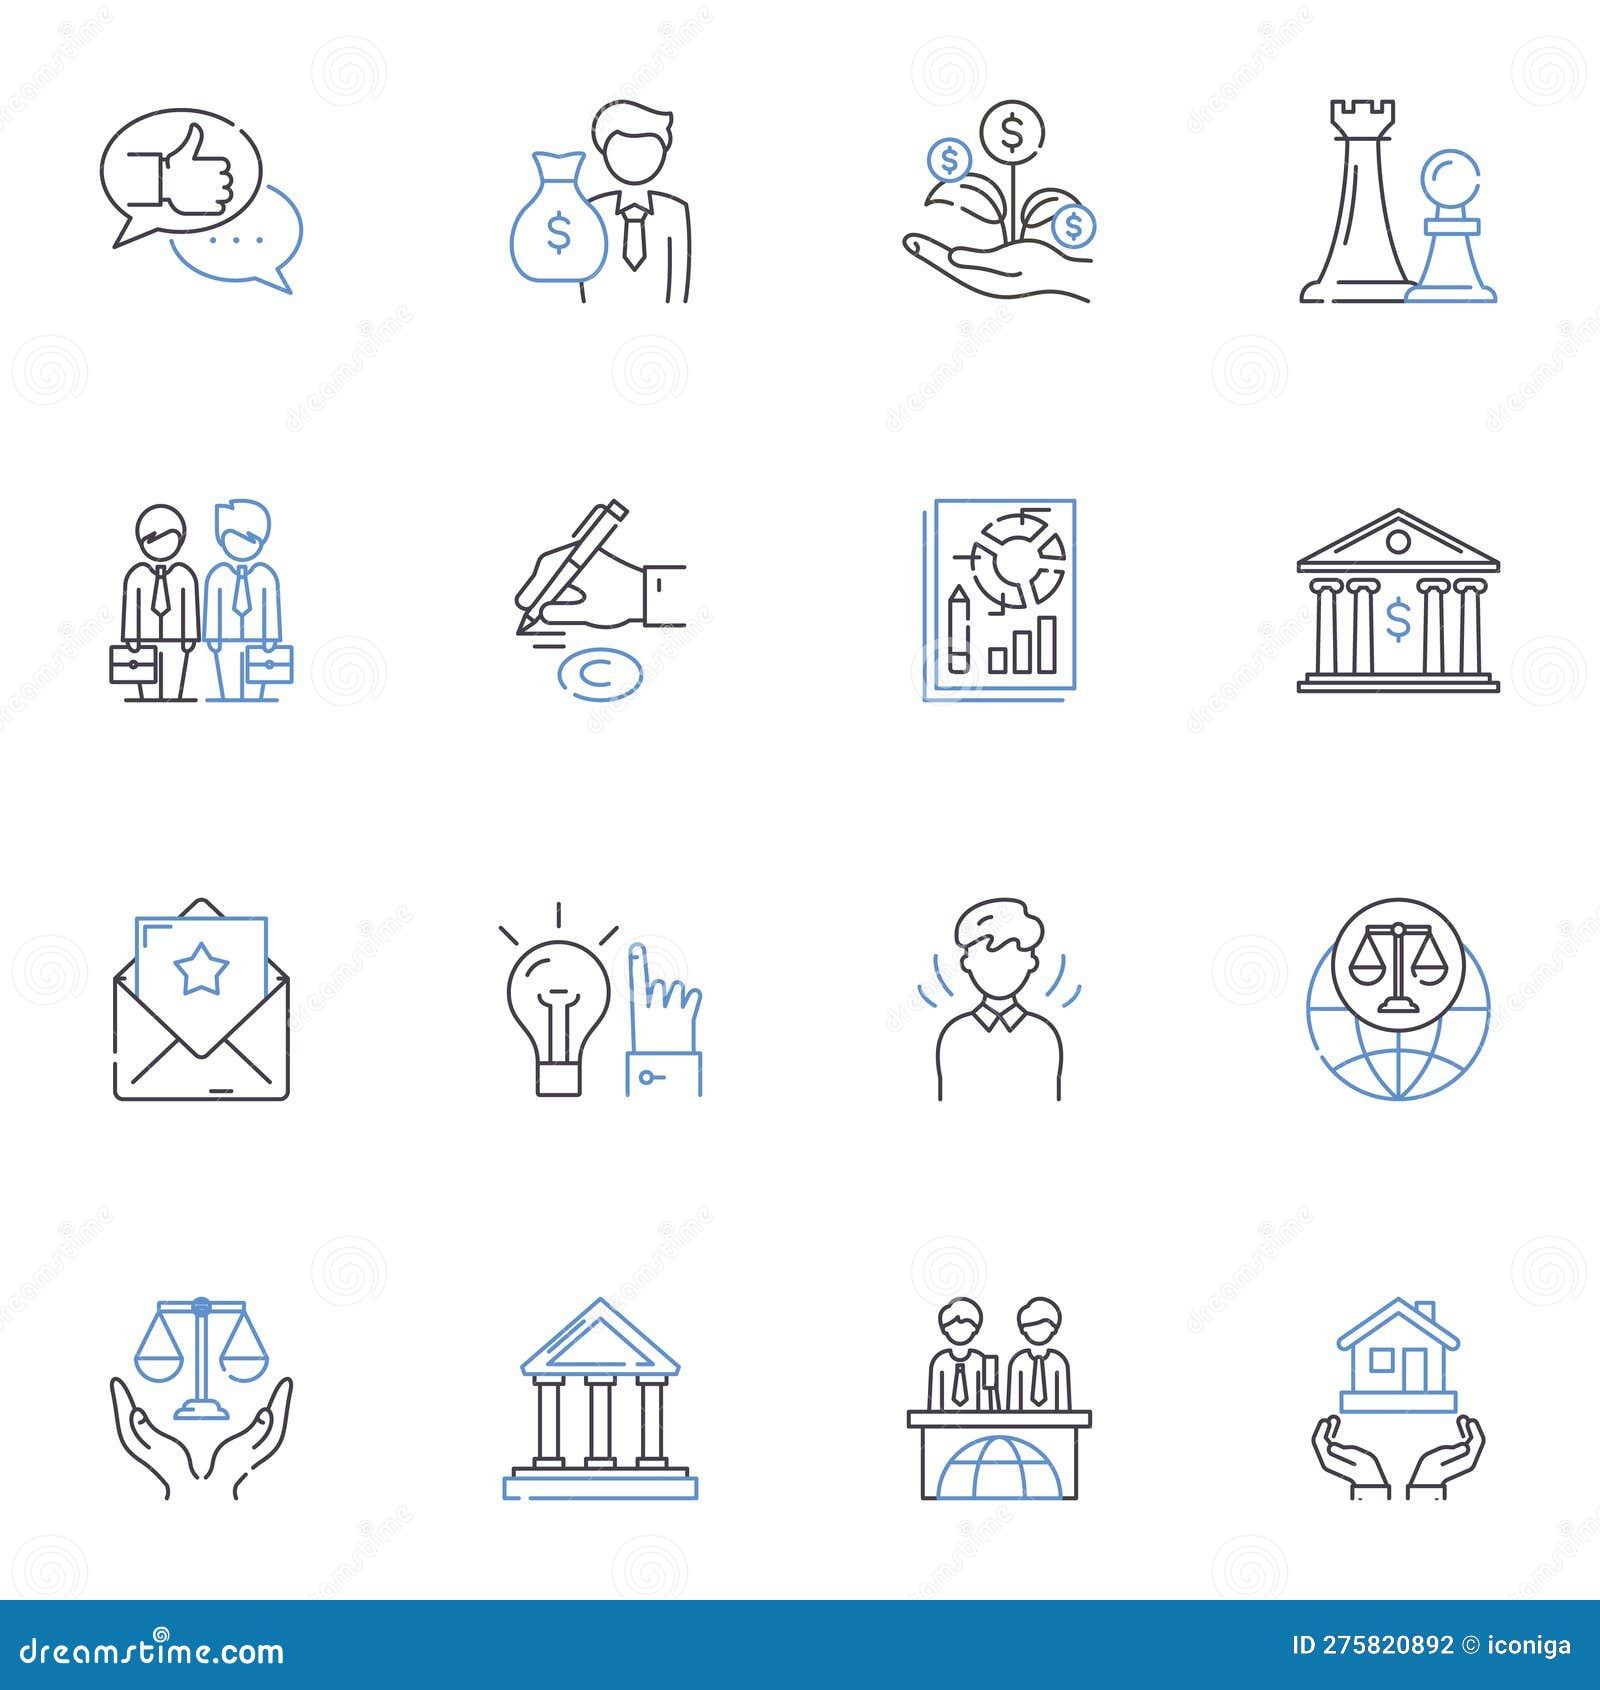 fairness line icons collection. justice, equality, impartiality, equitability, righteousness, hsty, integrity  and